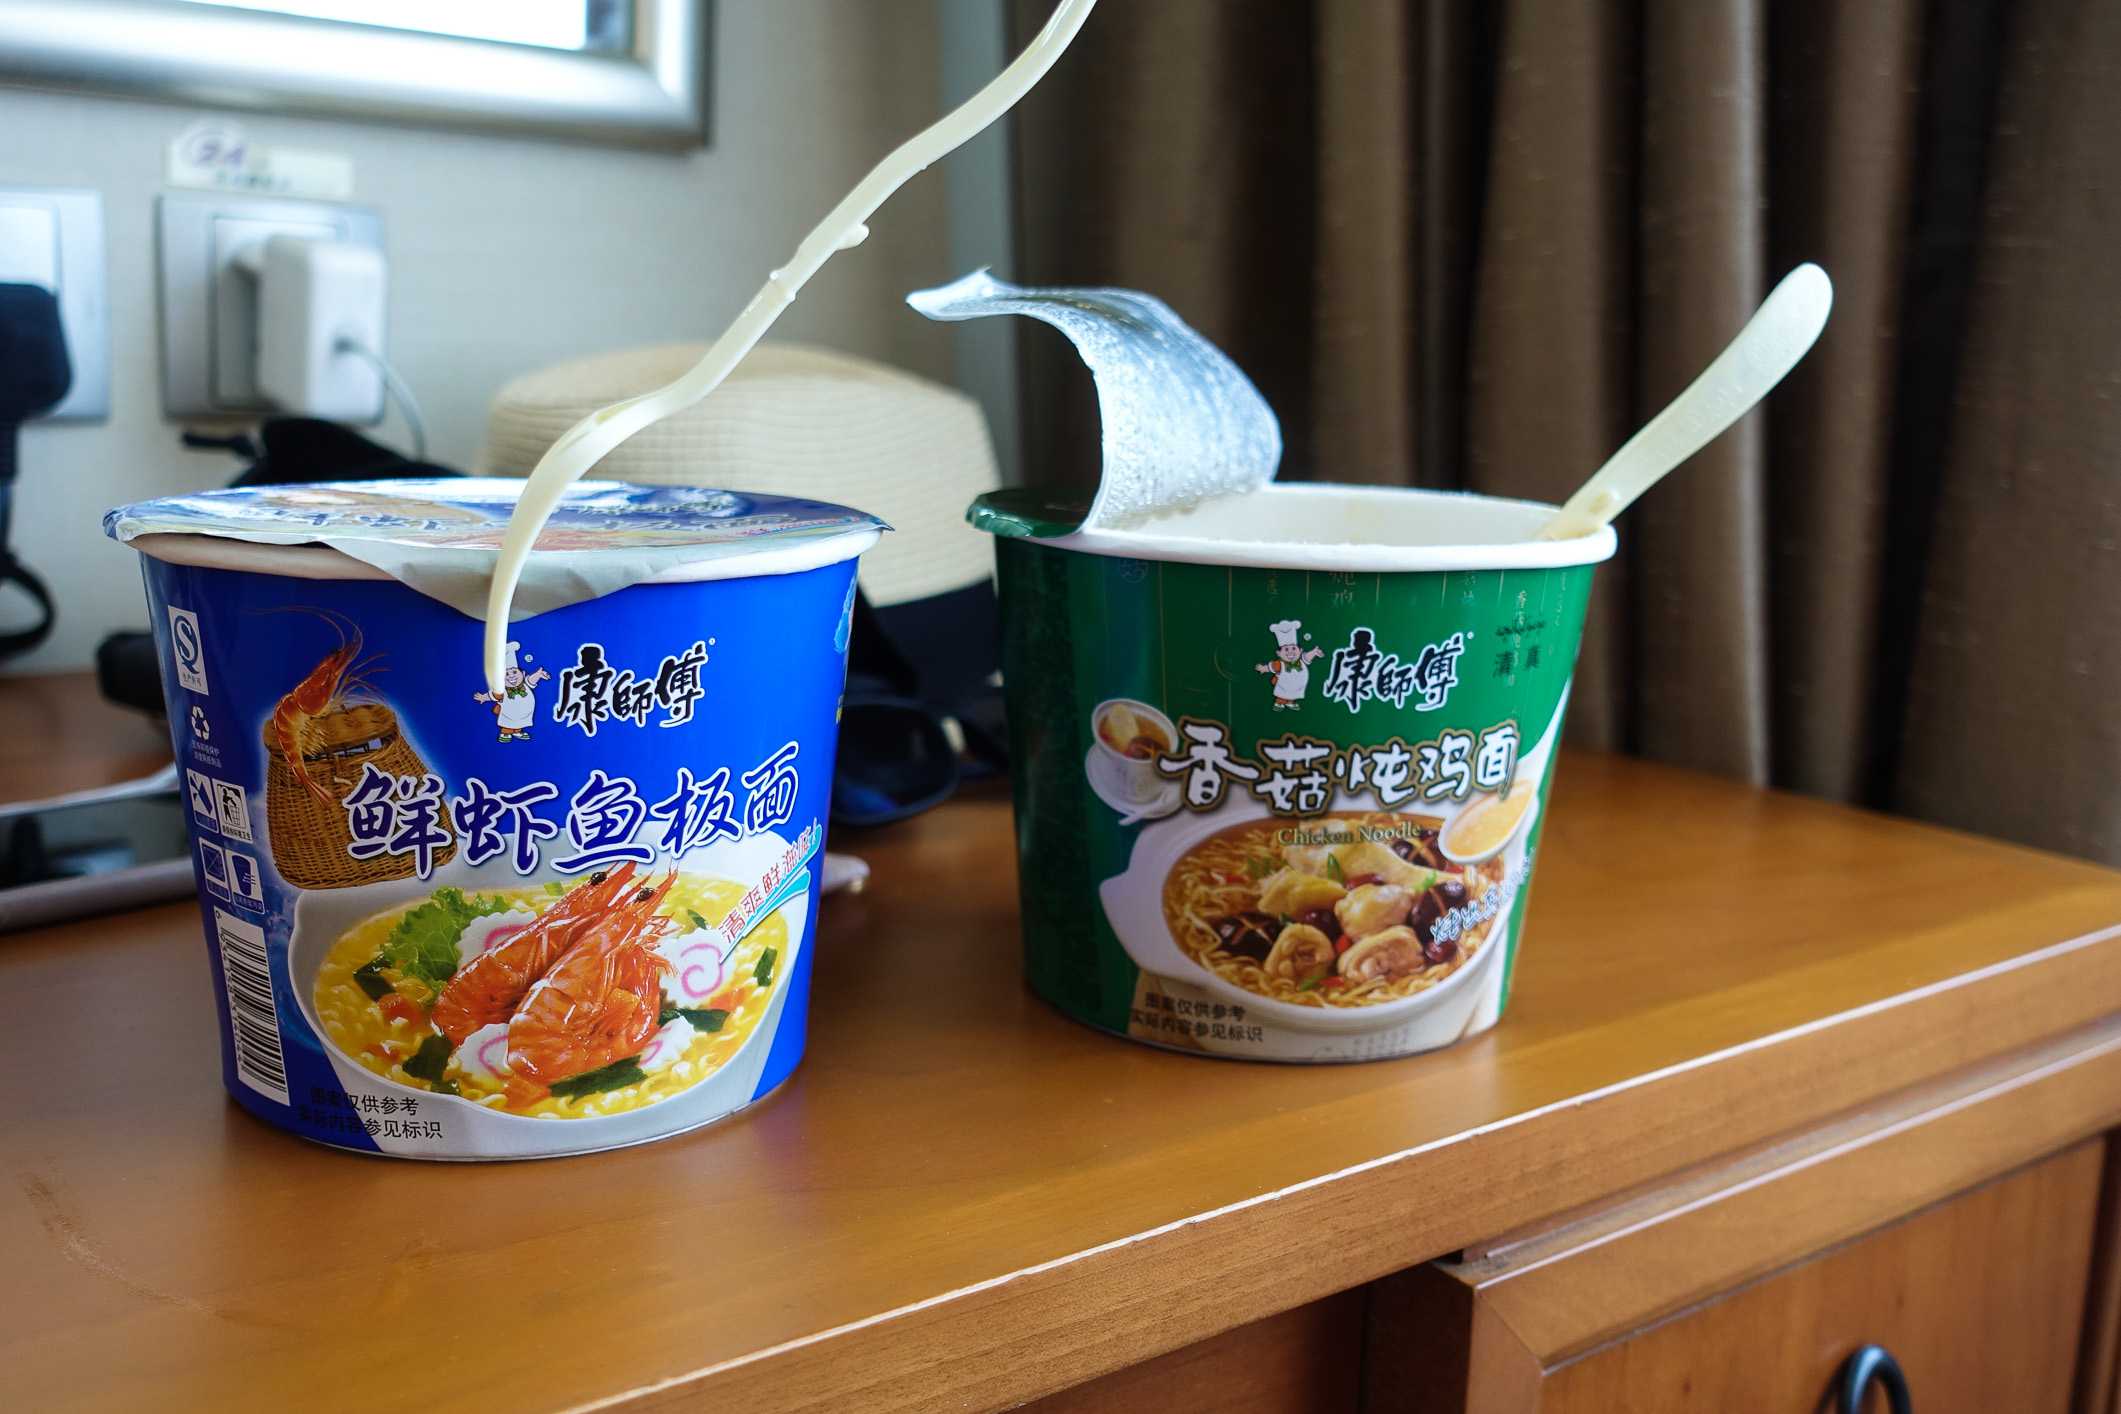 Instant noodles in China